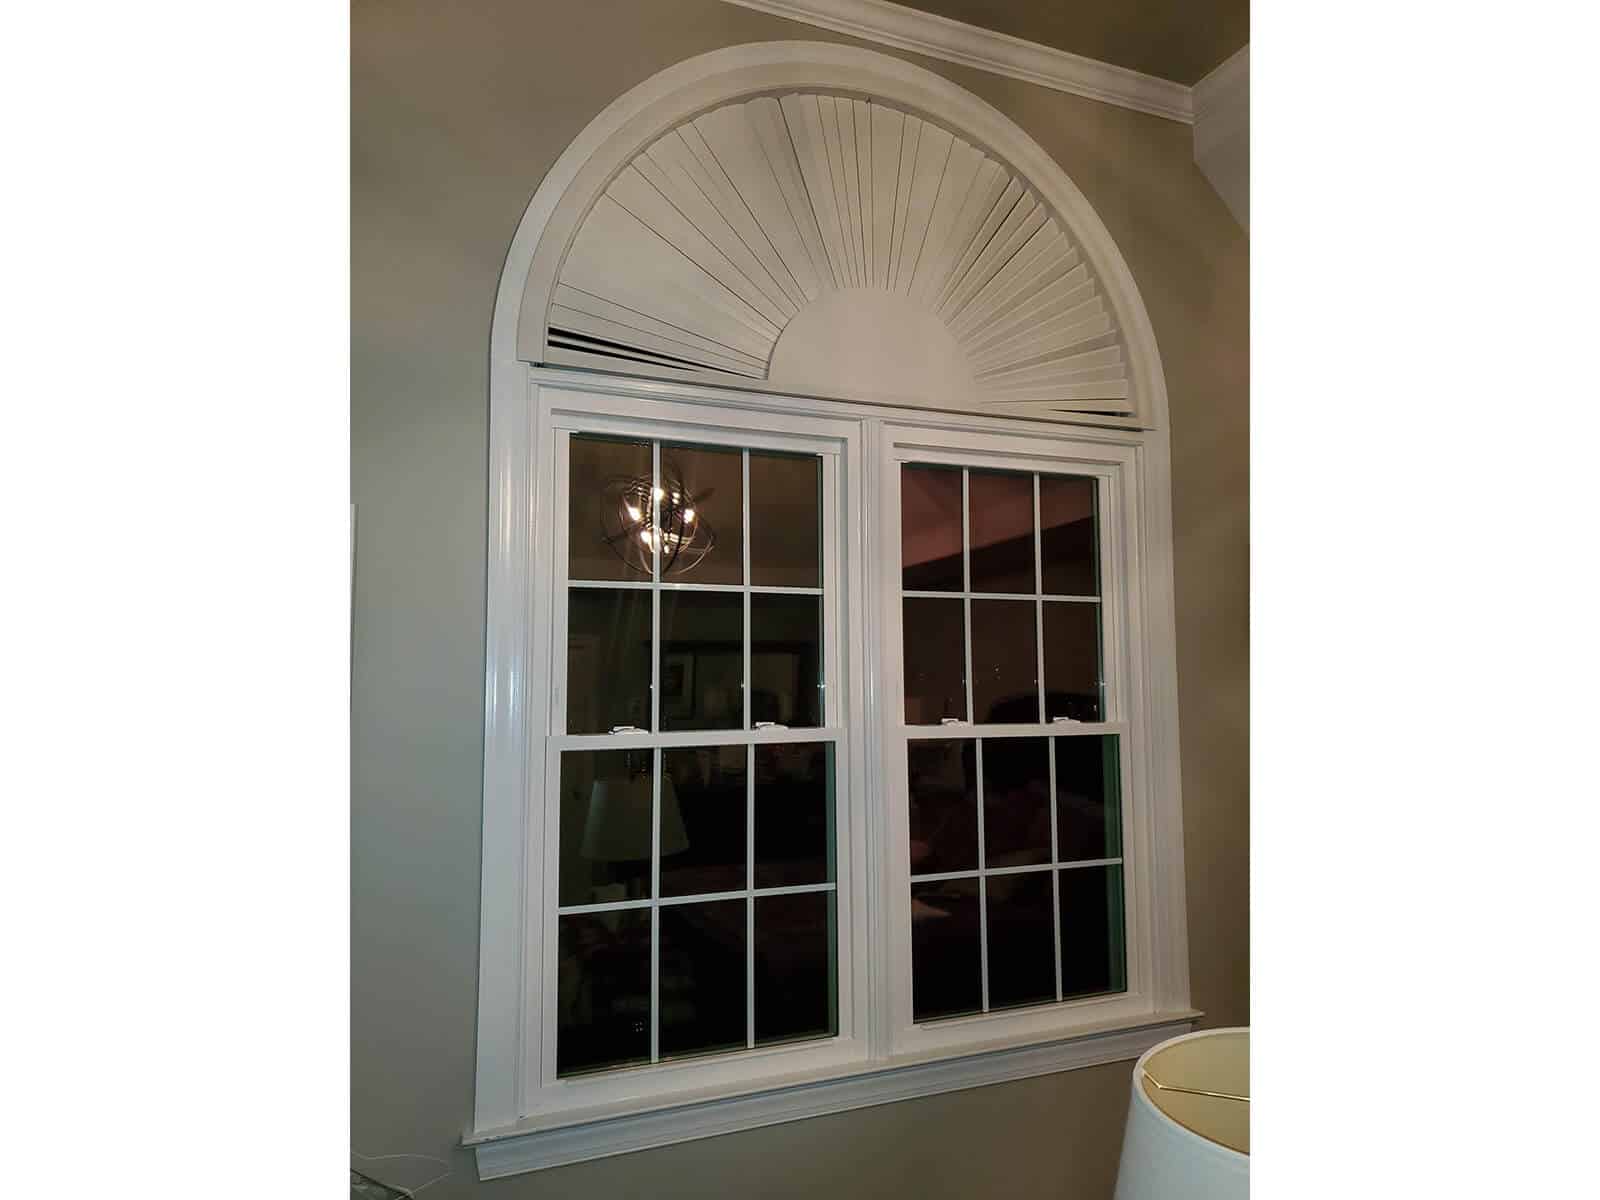 Interior view of two double hung windows